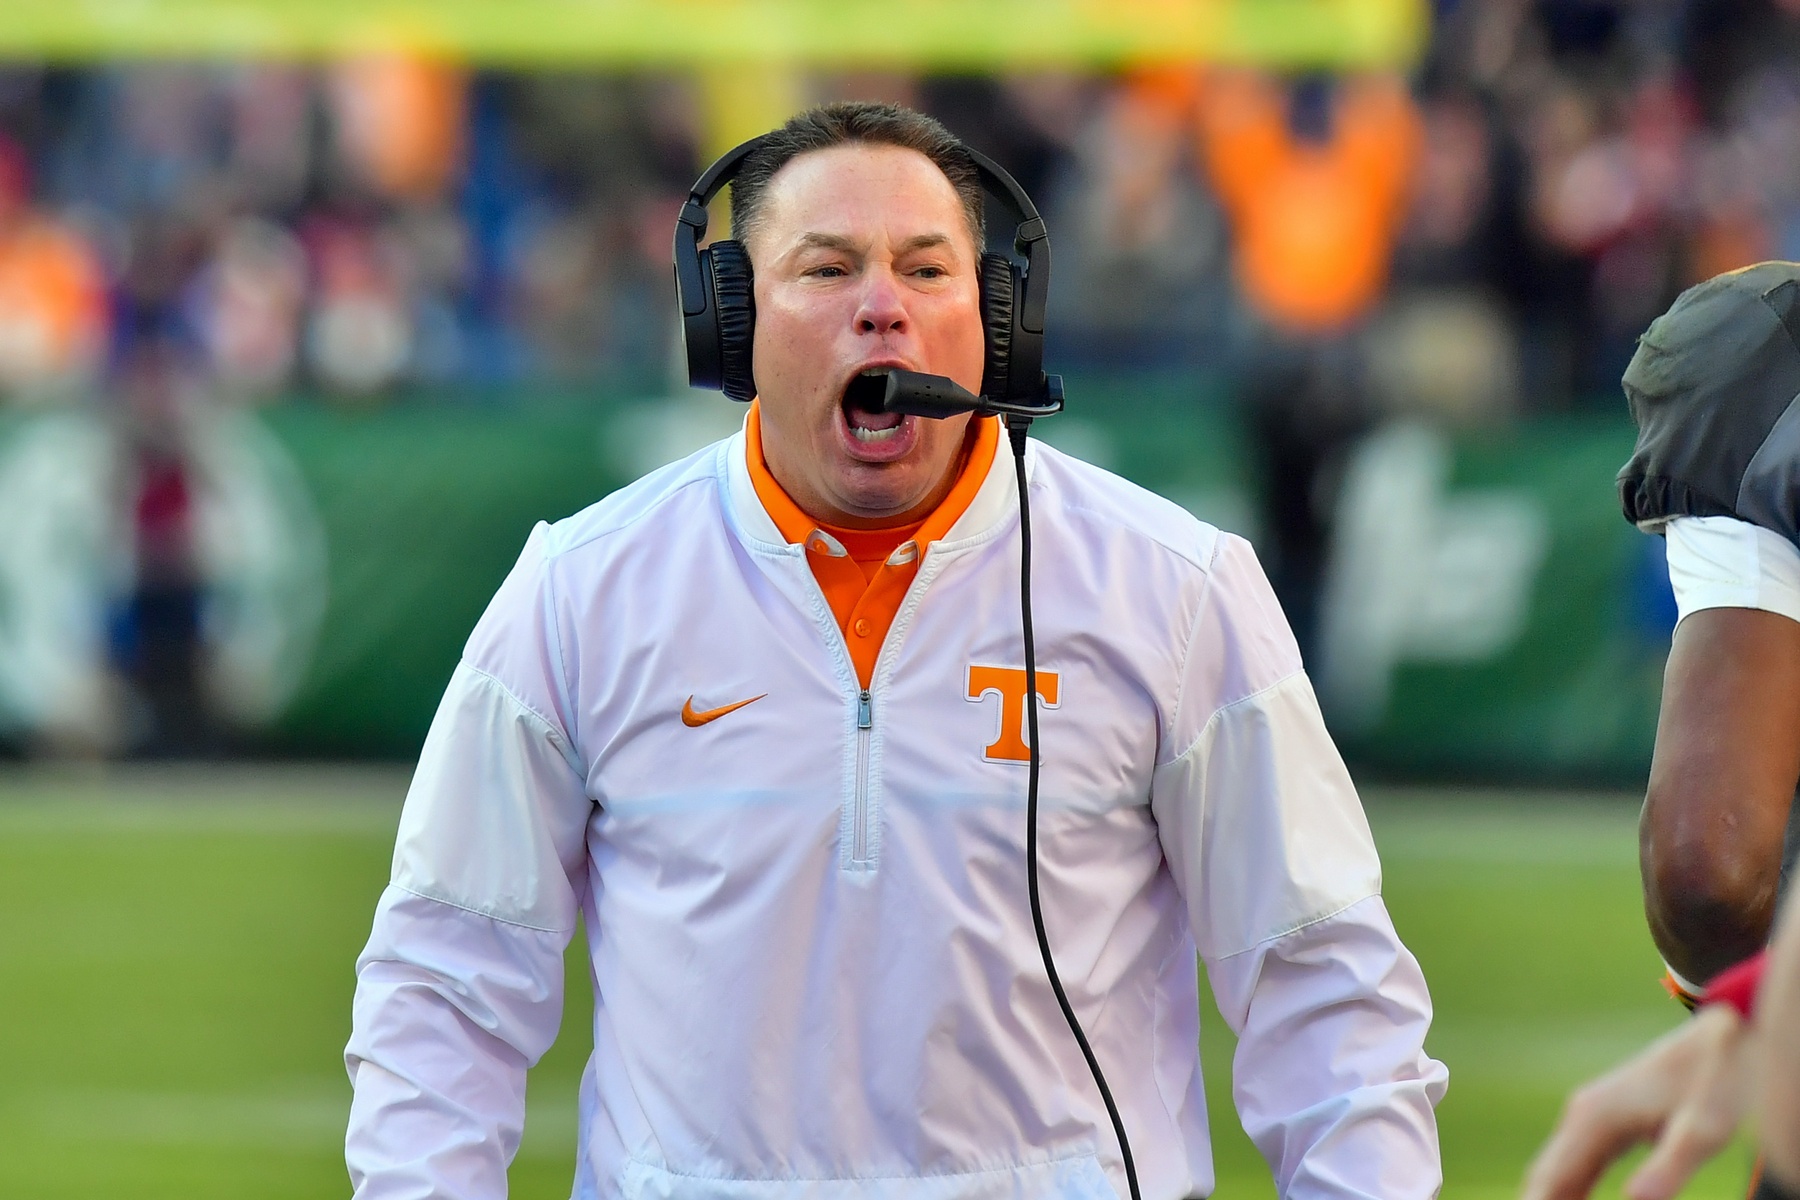 Dec 30, 2016; Nashville , TN, USA; Tennessee Volunteers head coach Butch Jones reacts to his team scoring a touchdown against the Nebraska Cornhuskers during the first half at Nissan Stadium. Mandatory Credit: Jim Brown-USA TODAY Sports